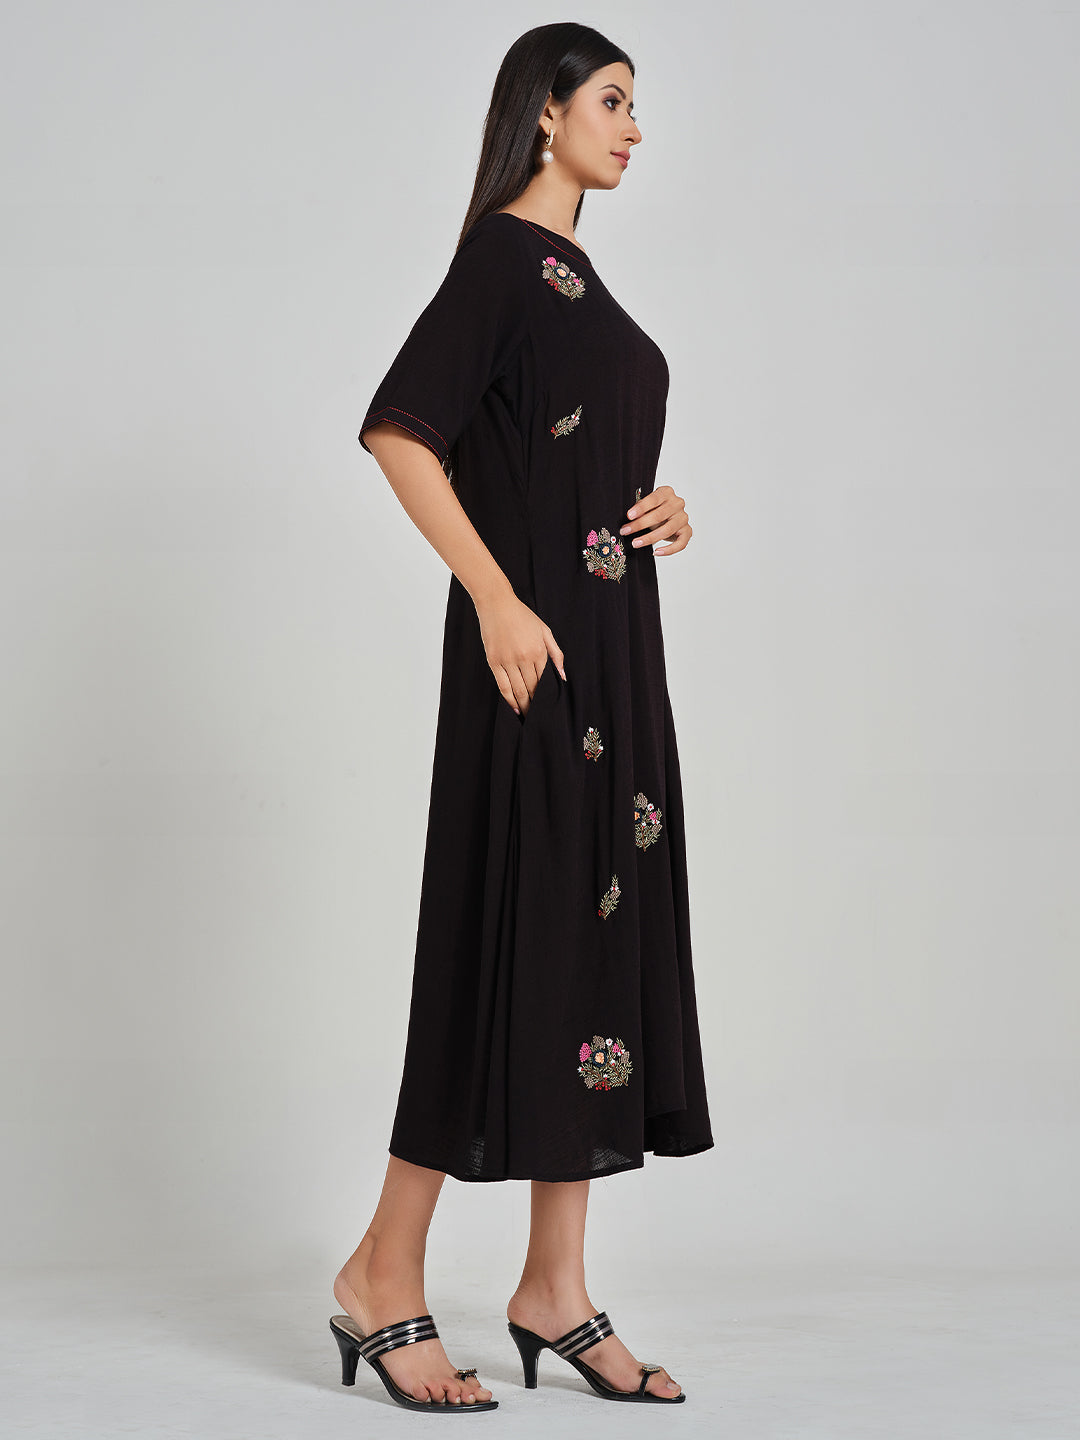 Black Embroidered A-Line Dress - ARH694